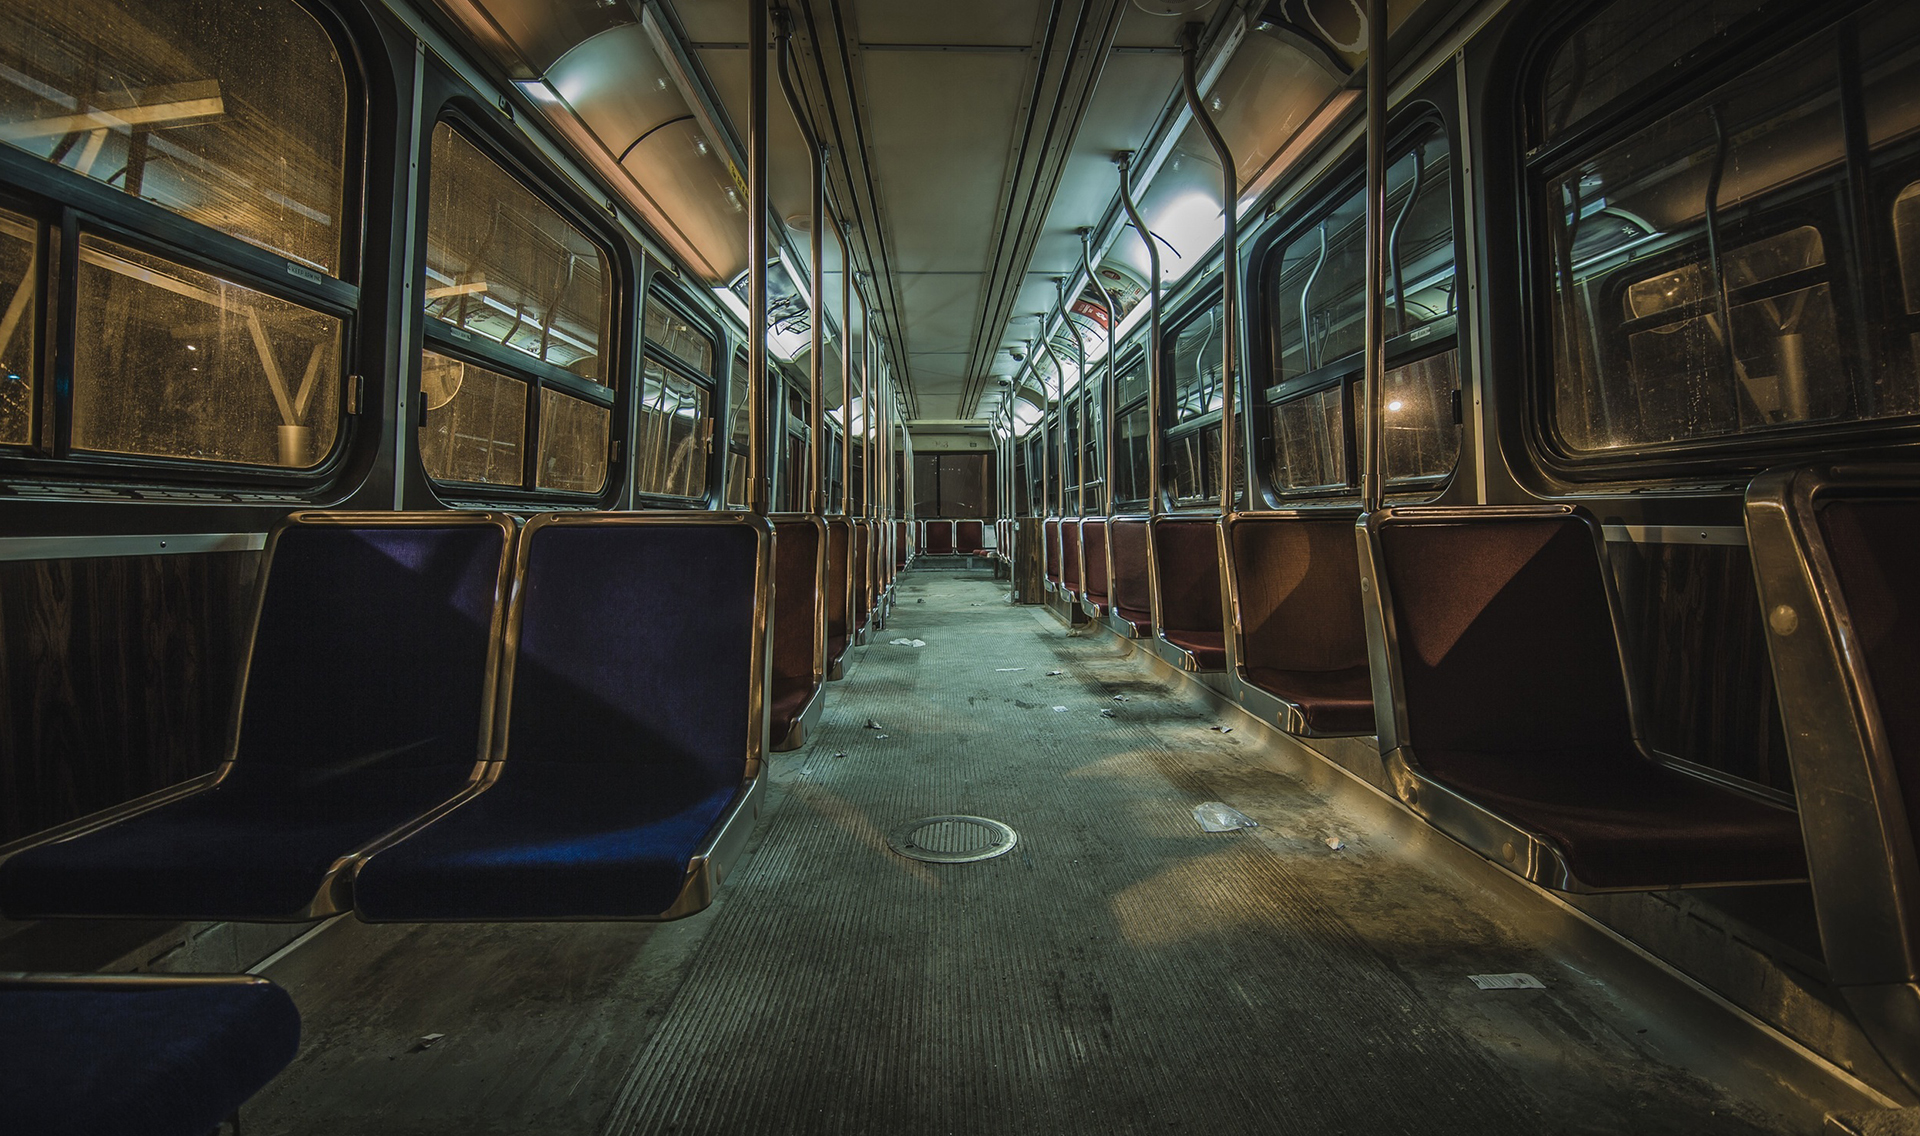 INT. POST APOCALYPTIC SUBWAY – DAY